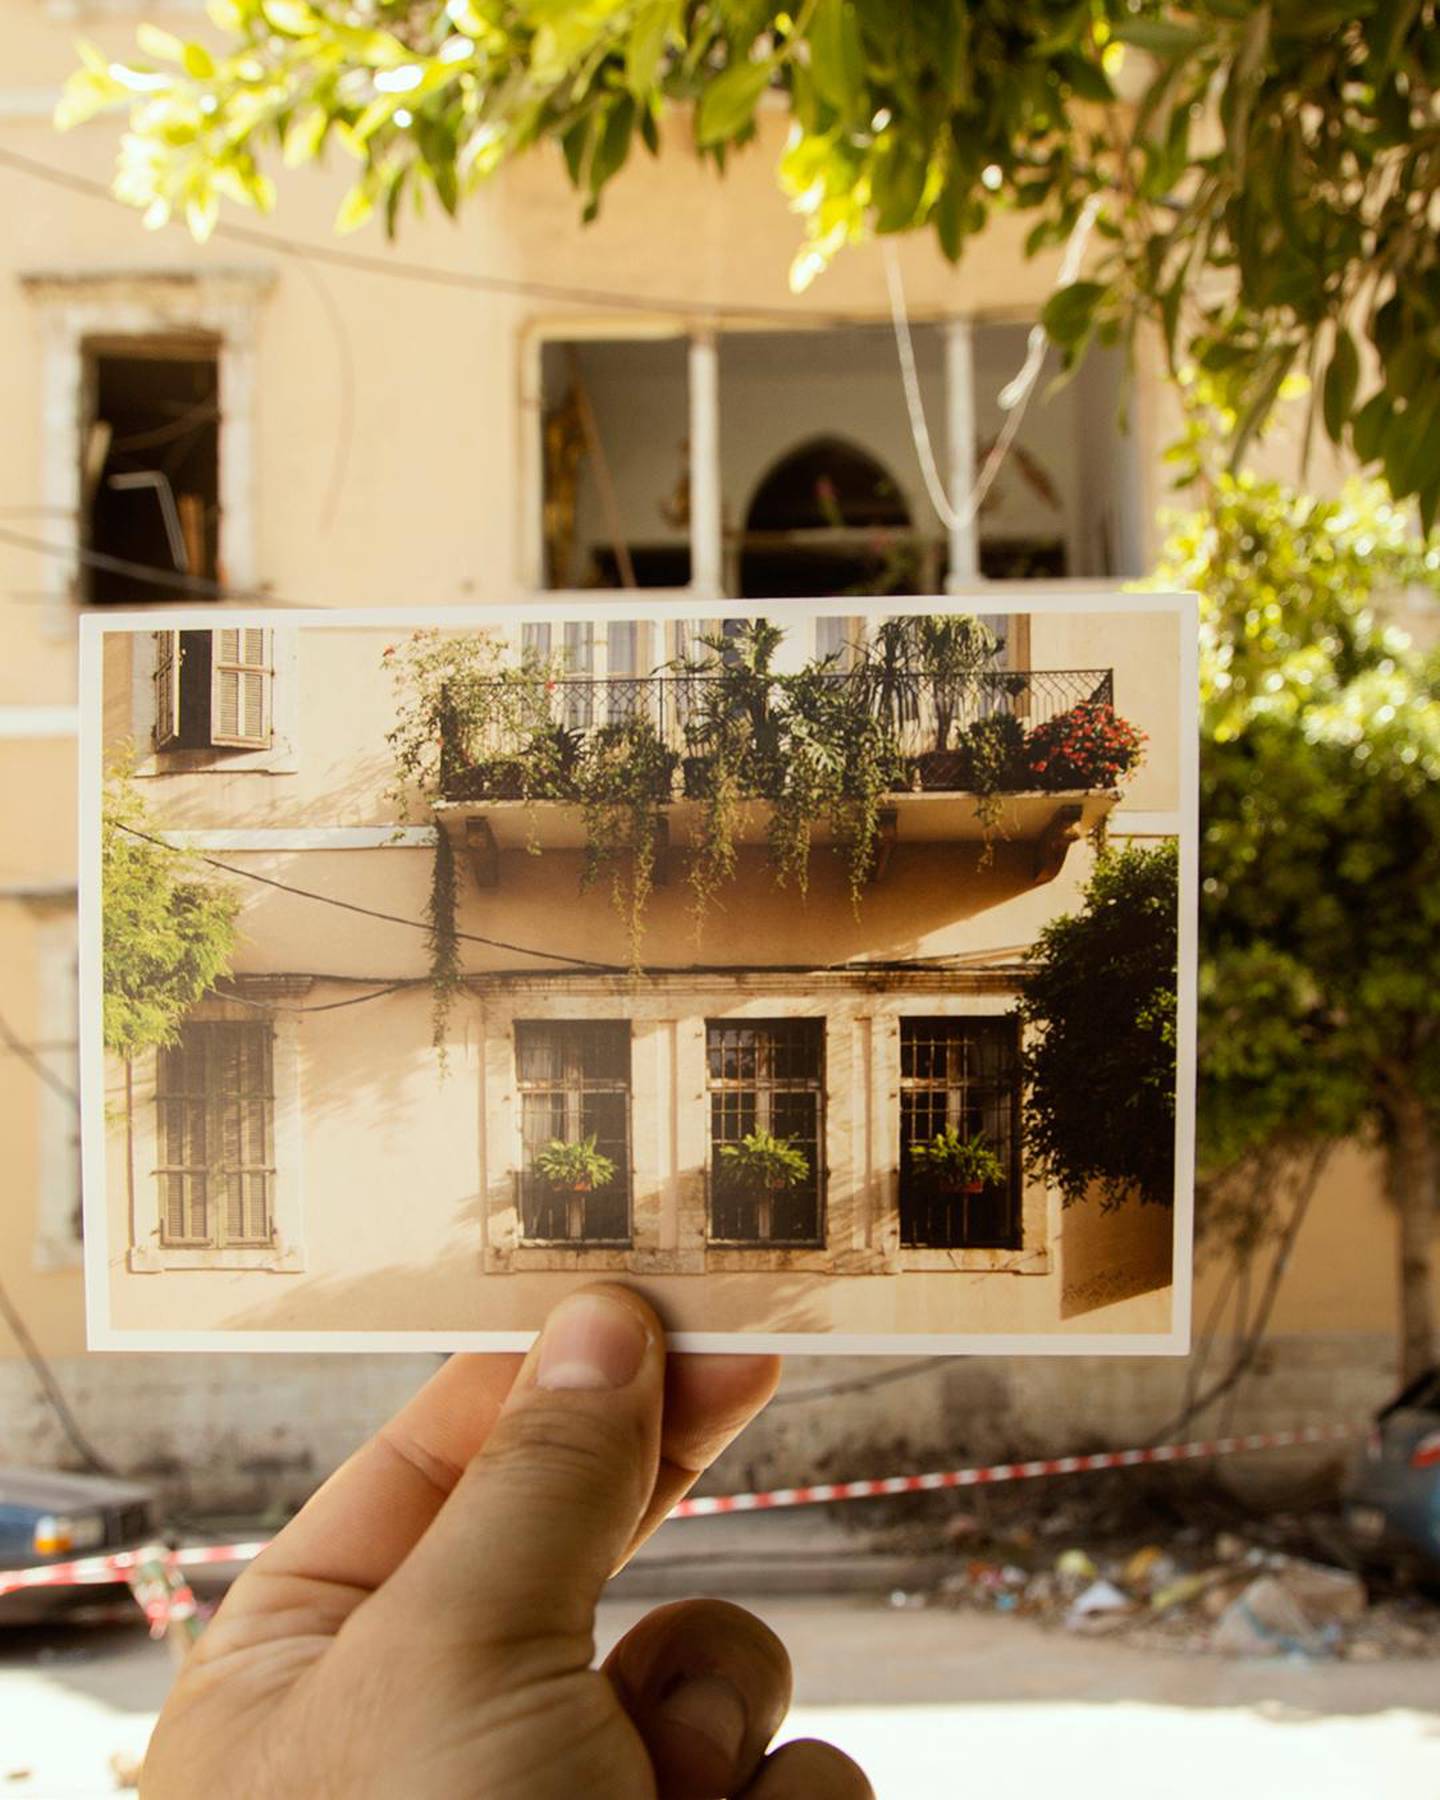 The postcards were left on the building facades. “It was a gesture of hope that we can still rebuild.” Joseph Khoury 